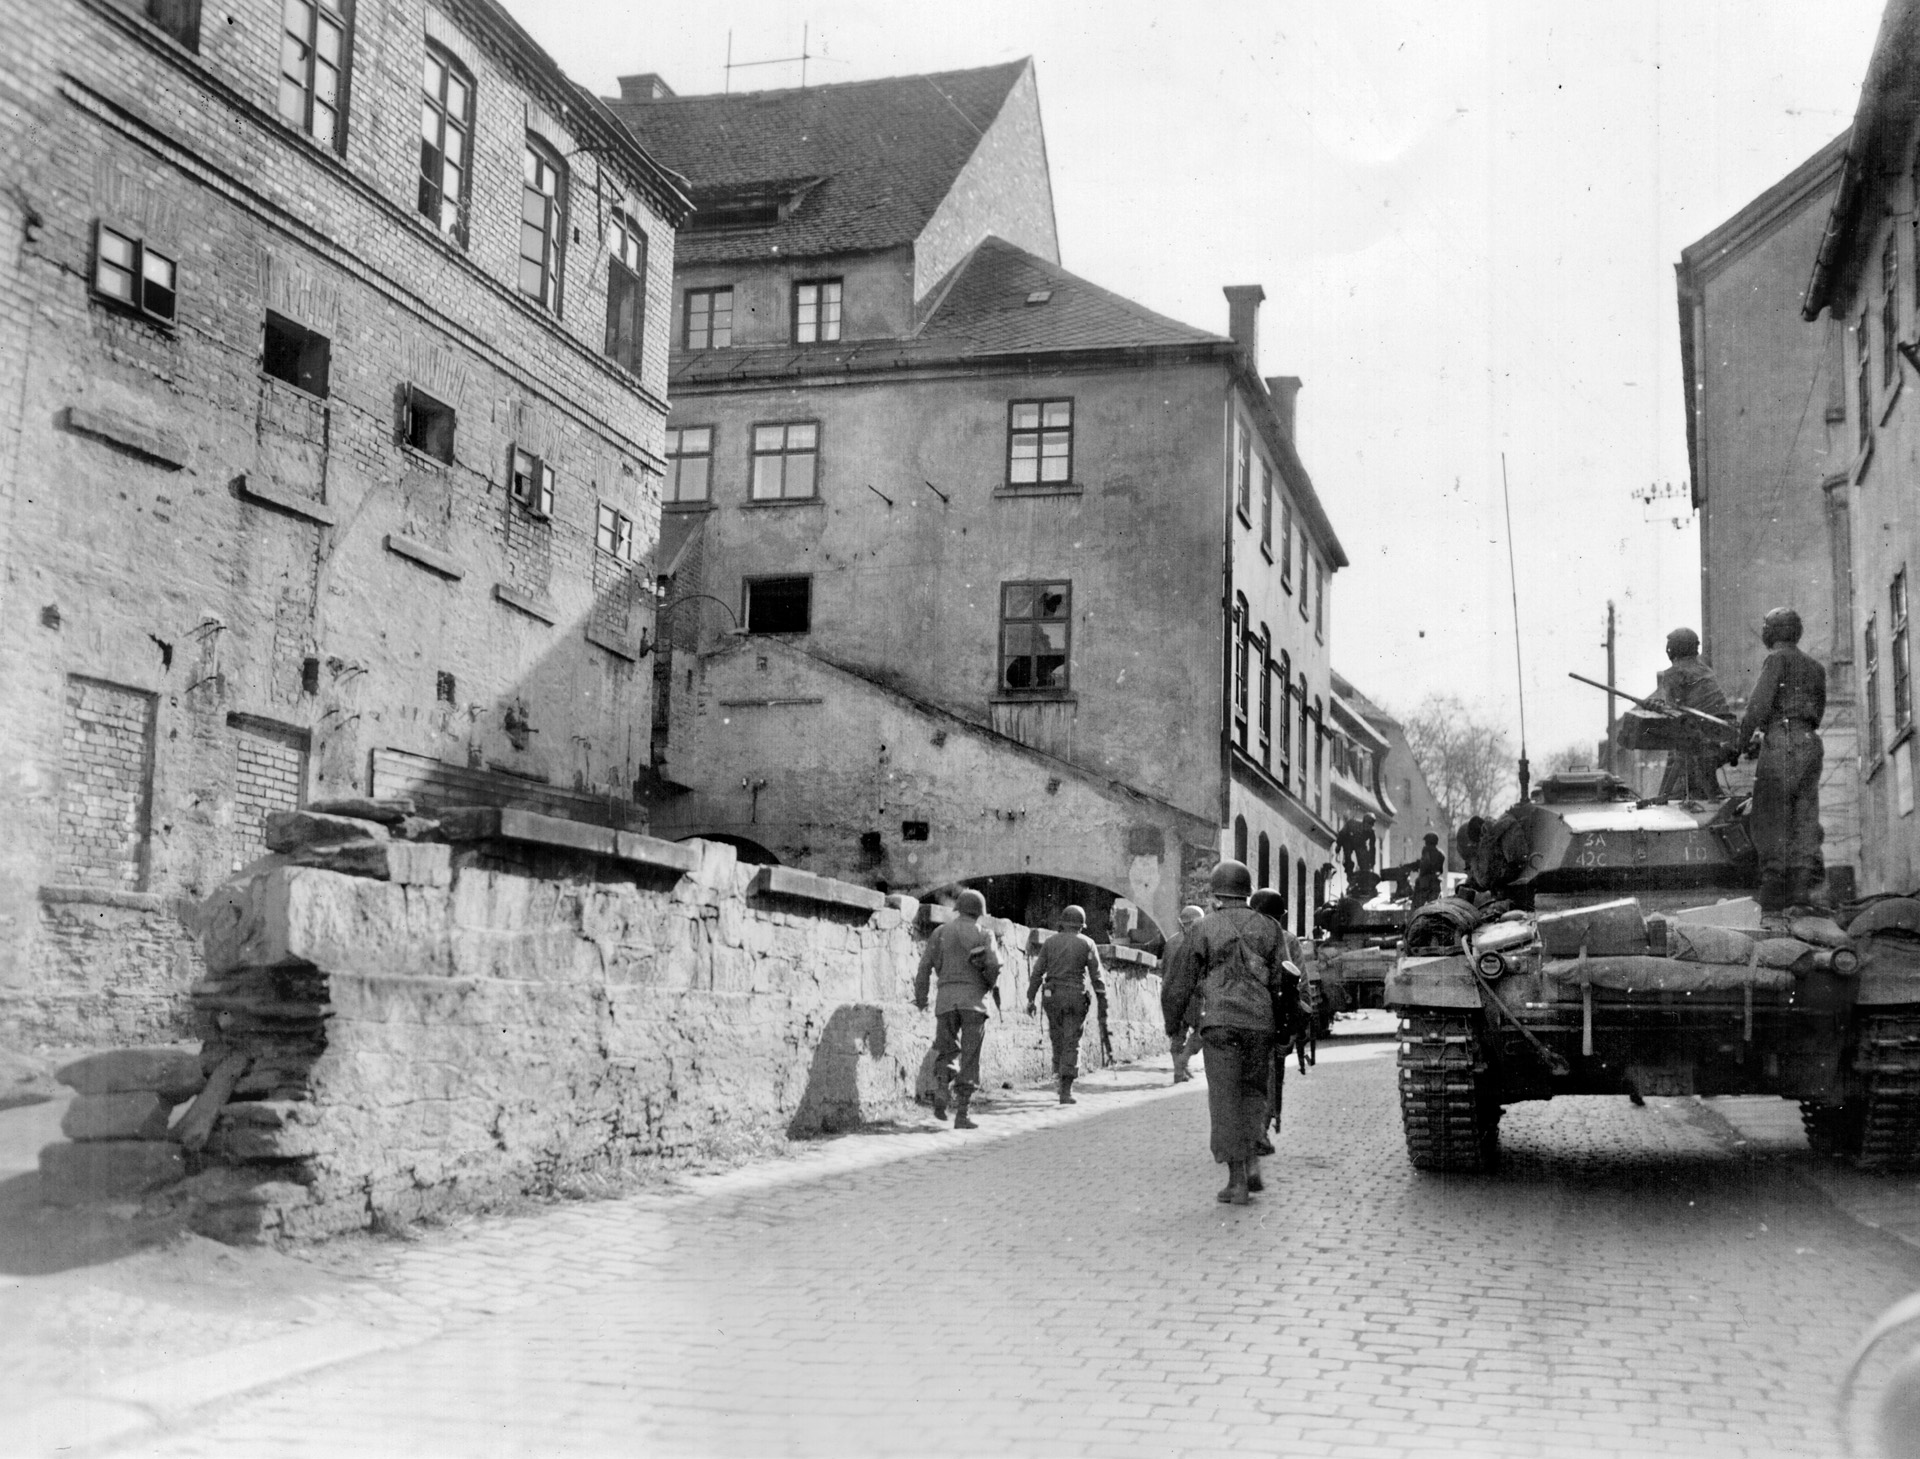 A tankmen on an M24 Chaffee “light” tank points his .50-caliber machine gun at a building in Cheb as 97th Infantry Division troops move through the town. The Chaffee, with a 75mm main gun, began replacing the obsolete M5 Stuart tank in late 1944.